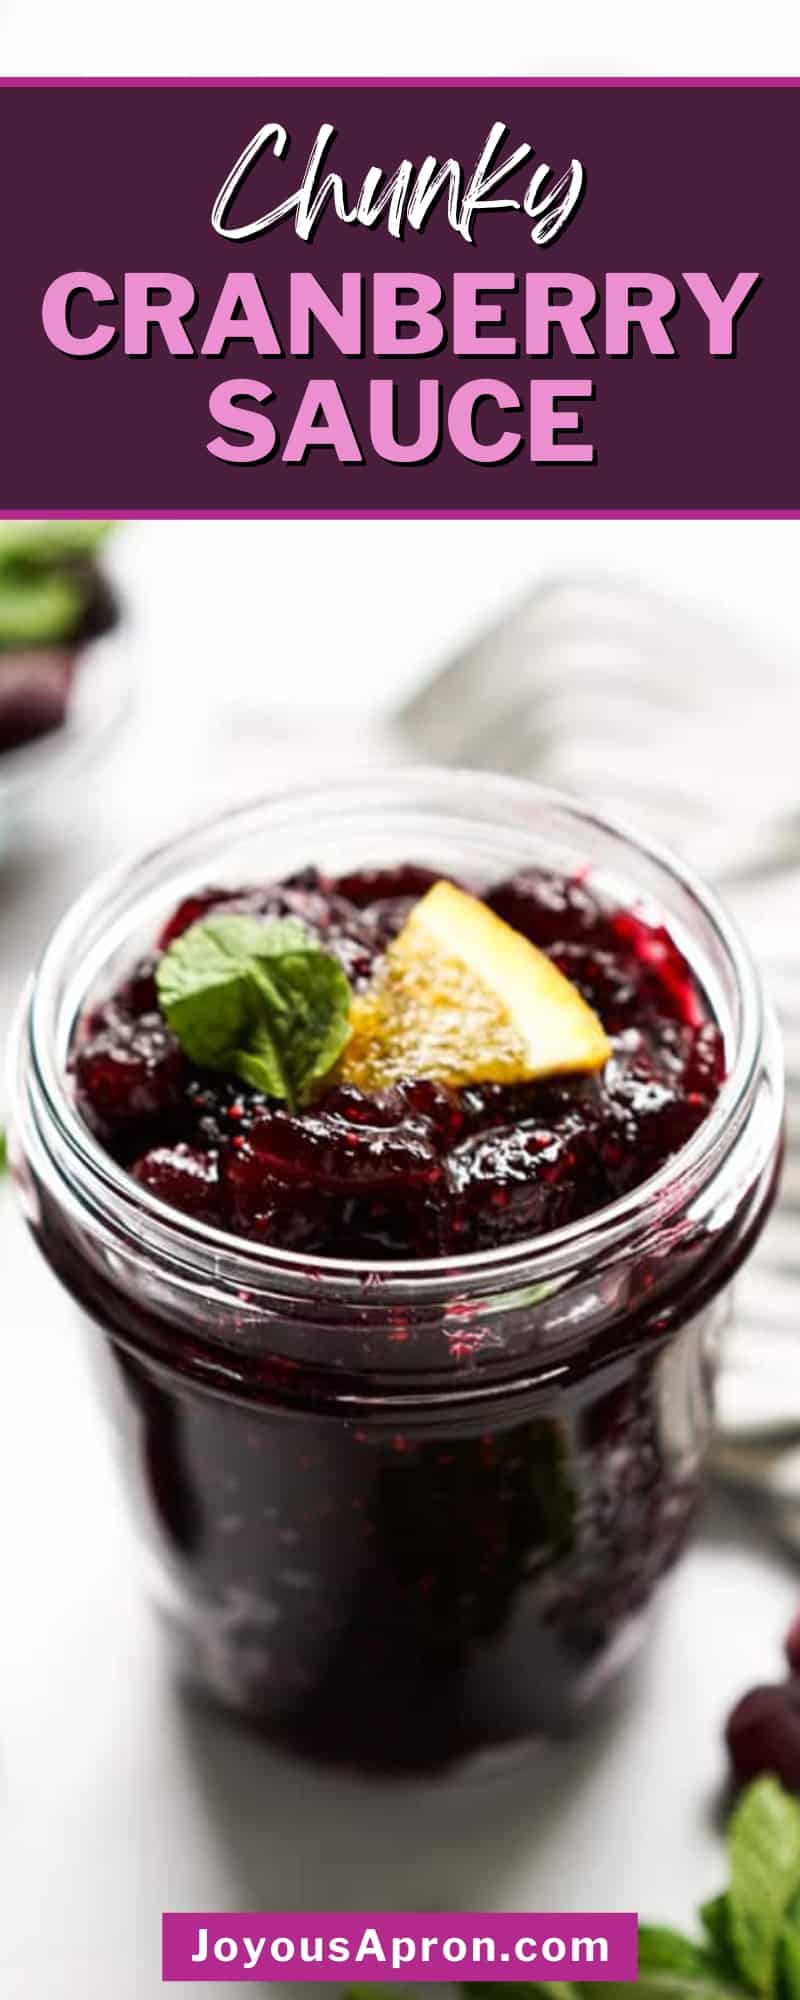 Cranberry Sauce - homemade, 4-ingredient classic cranberry sauce. Sweet, tart and chunky homemade cranberry sauce that is easy to make and perfect for the Thanksgiving and Christmas holidays! via @joyousapron